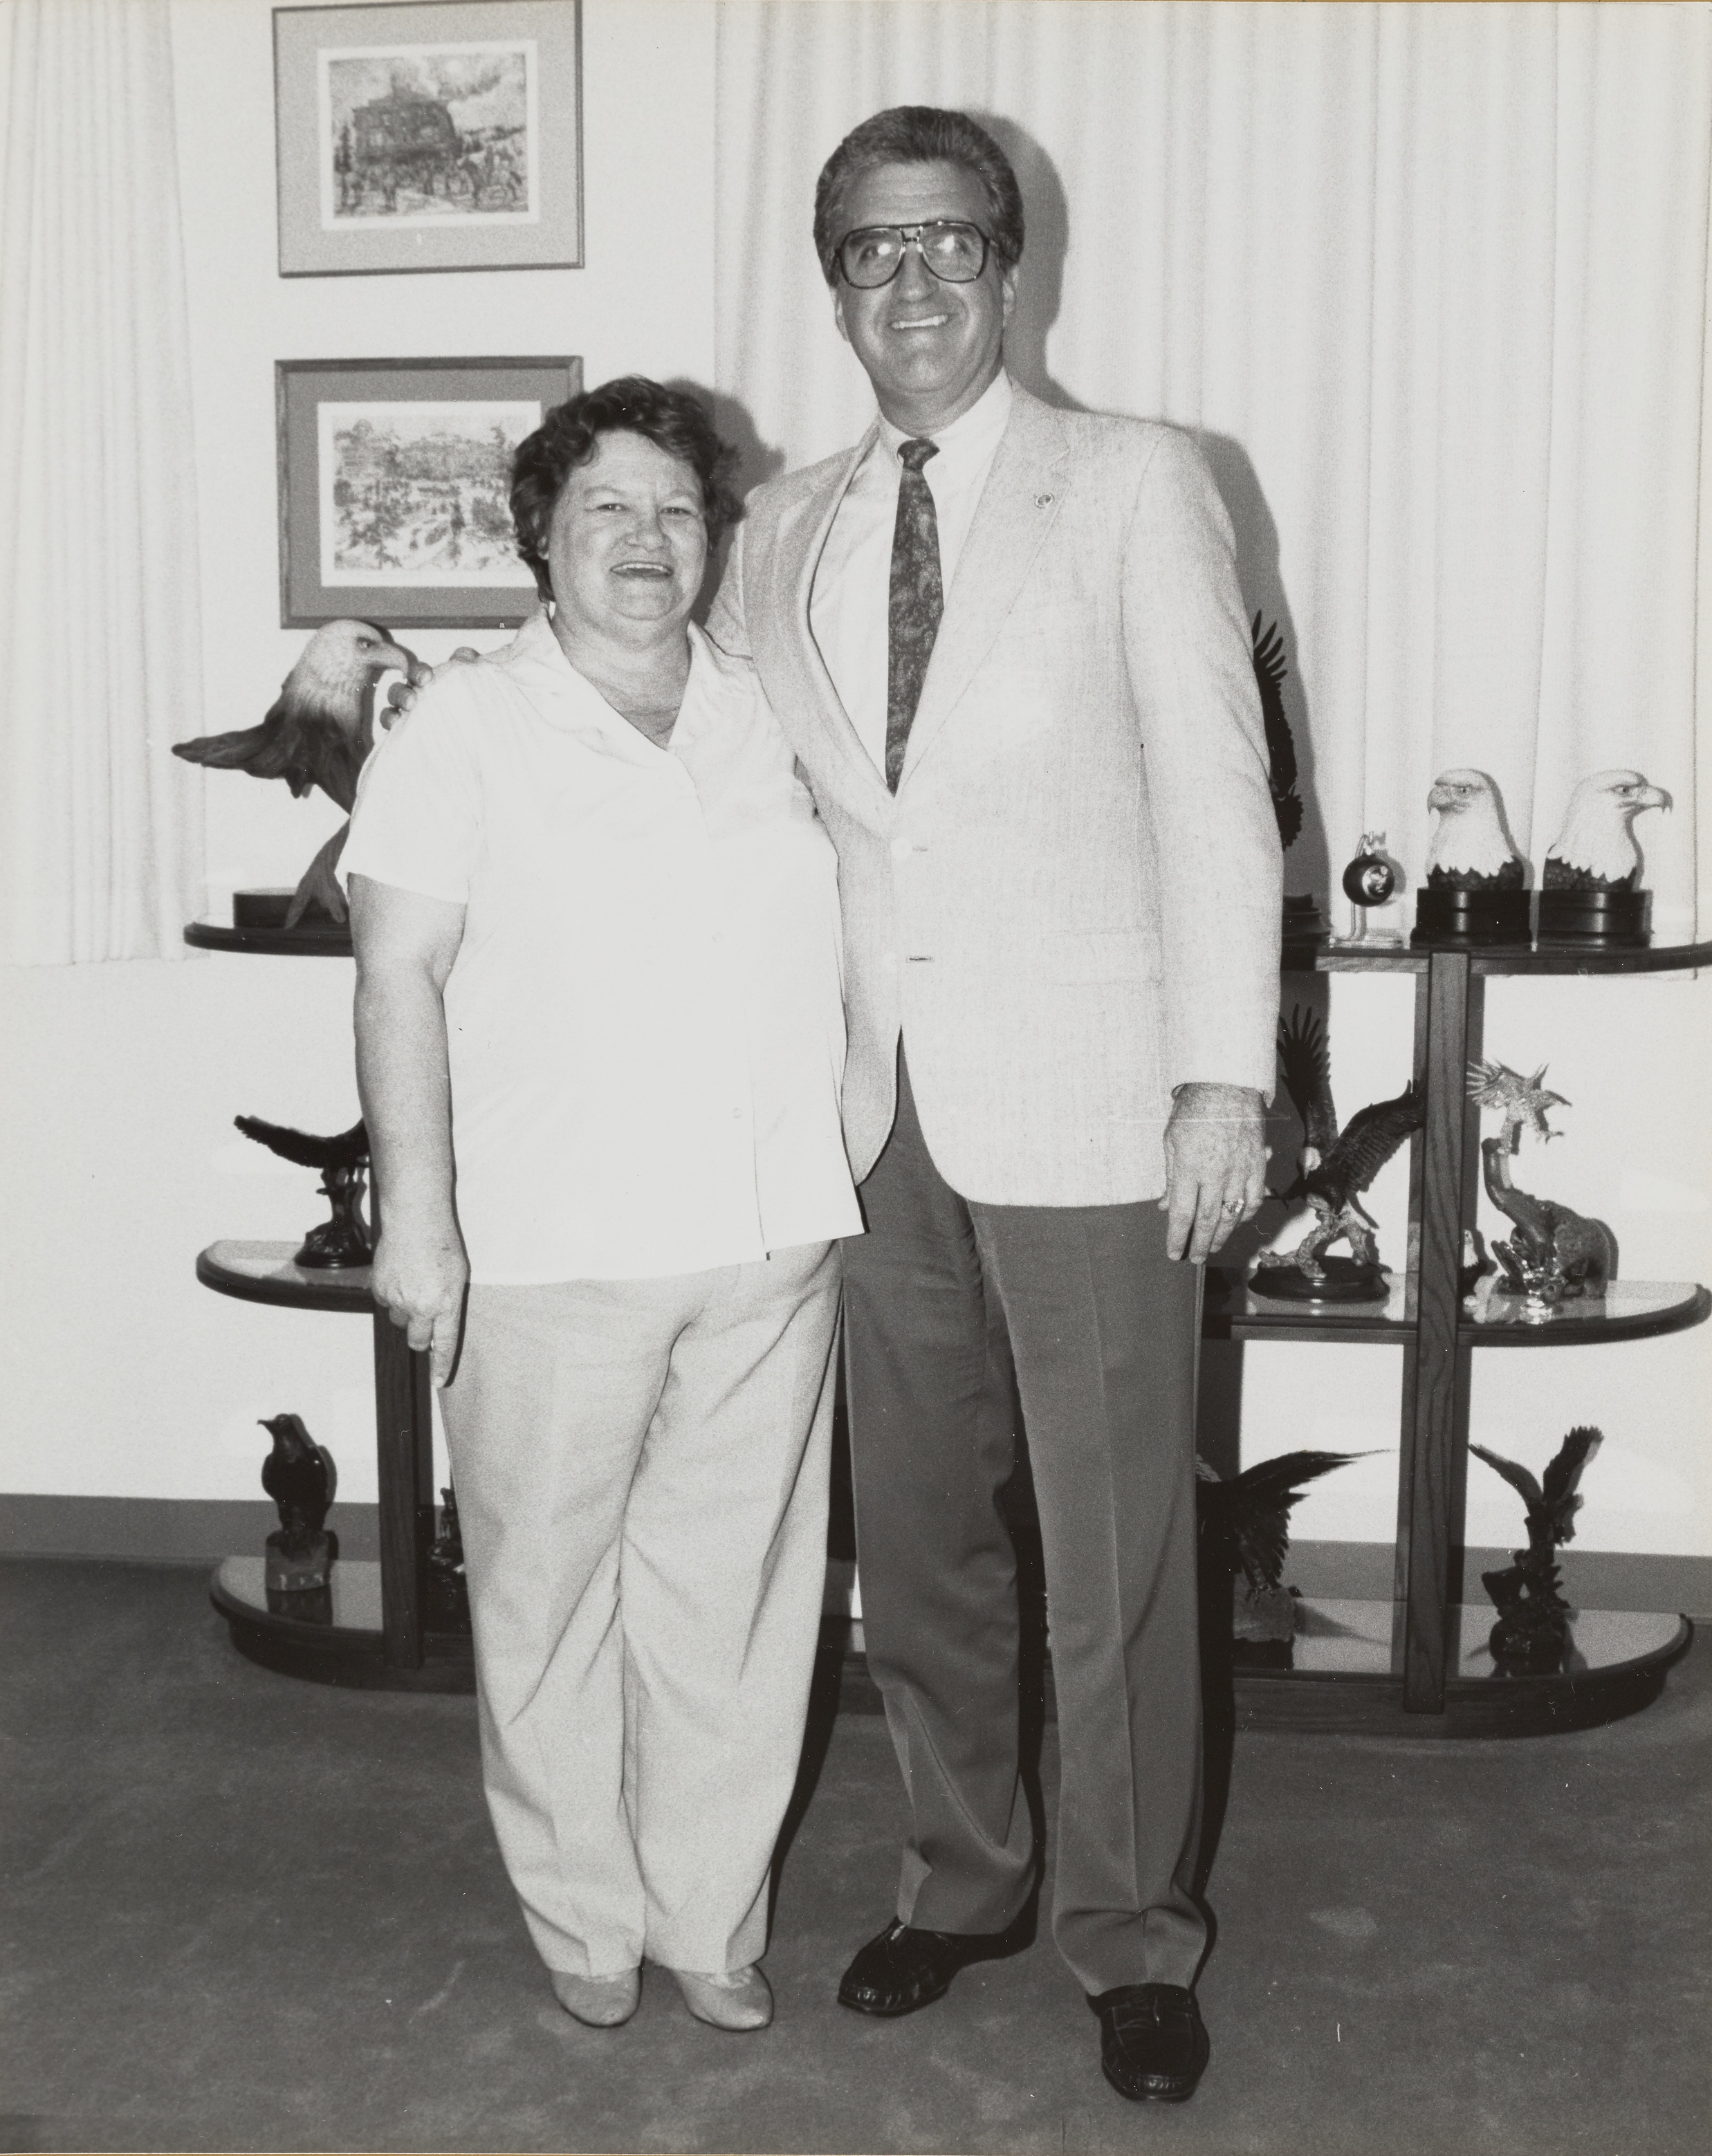 Photograph of Ron Lurie with J & J Pageant coordinator Betty Munson, April 17, 1990